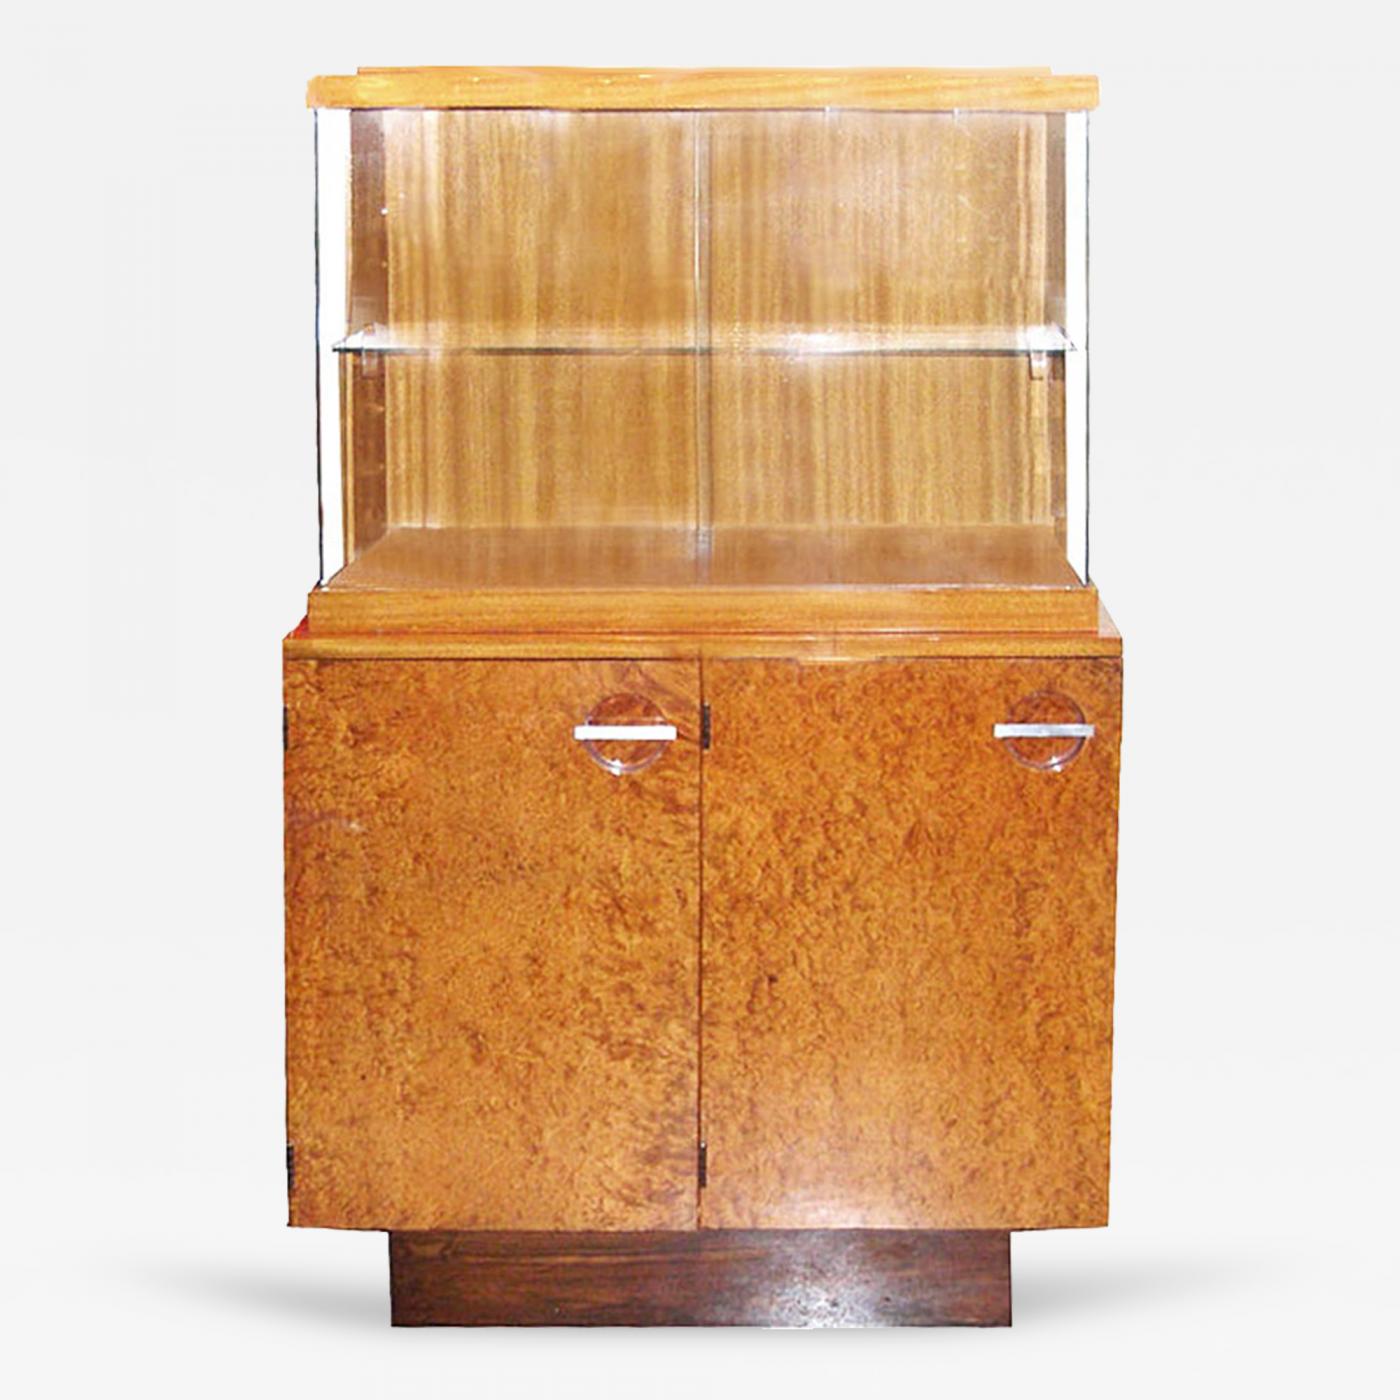 Tall Art Deco Cabinet By Gilbert Rohde For Herman Miller 1937